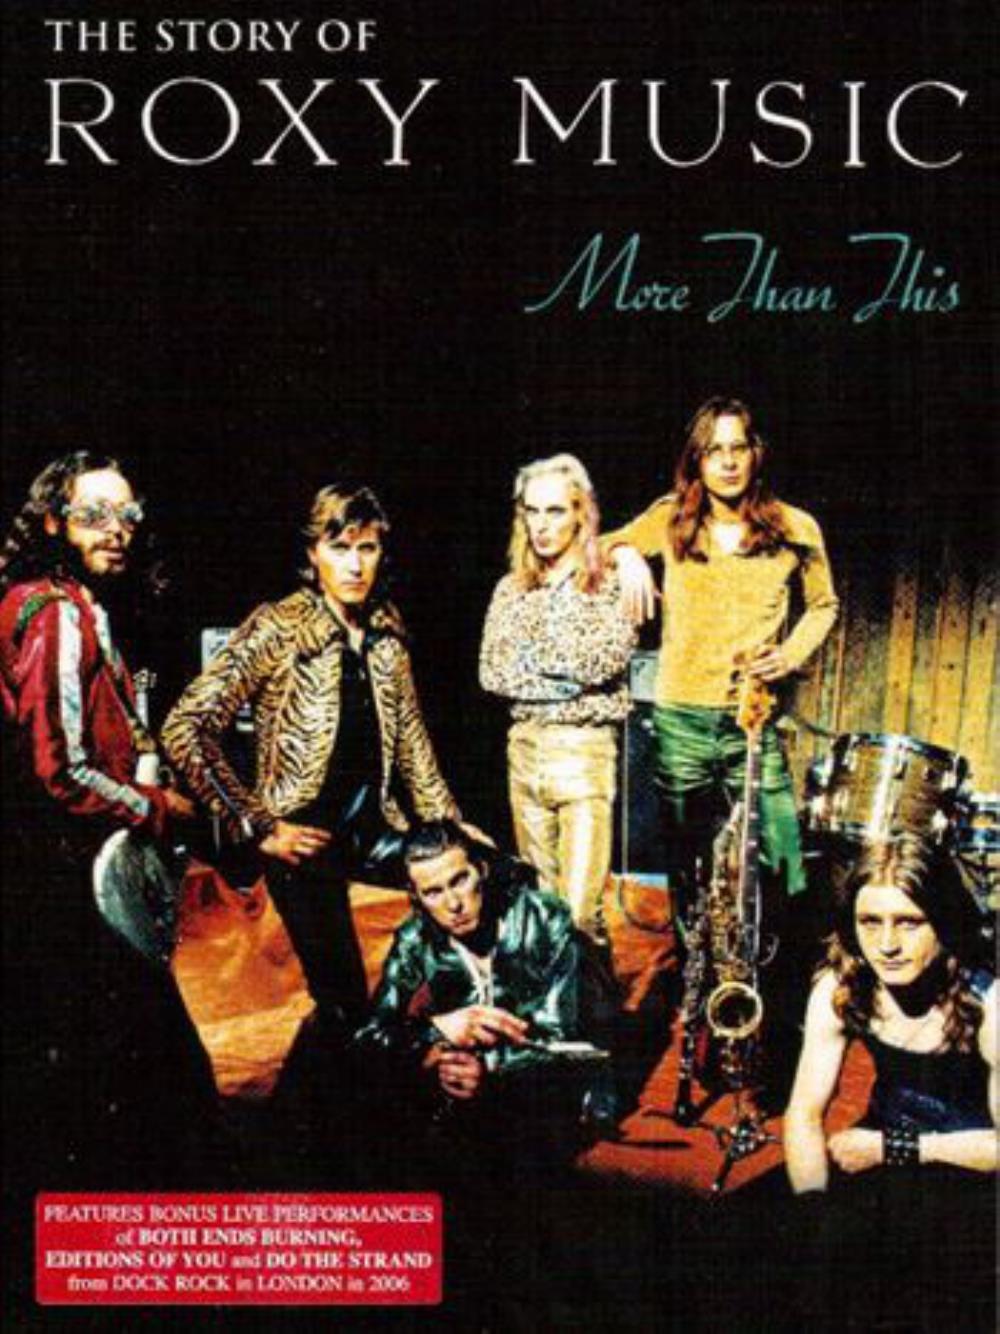 Roxy Music - The Story of Roxy Music - More Than This CD (album) cover